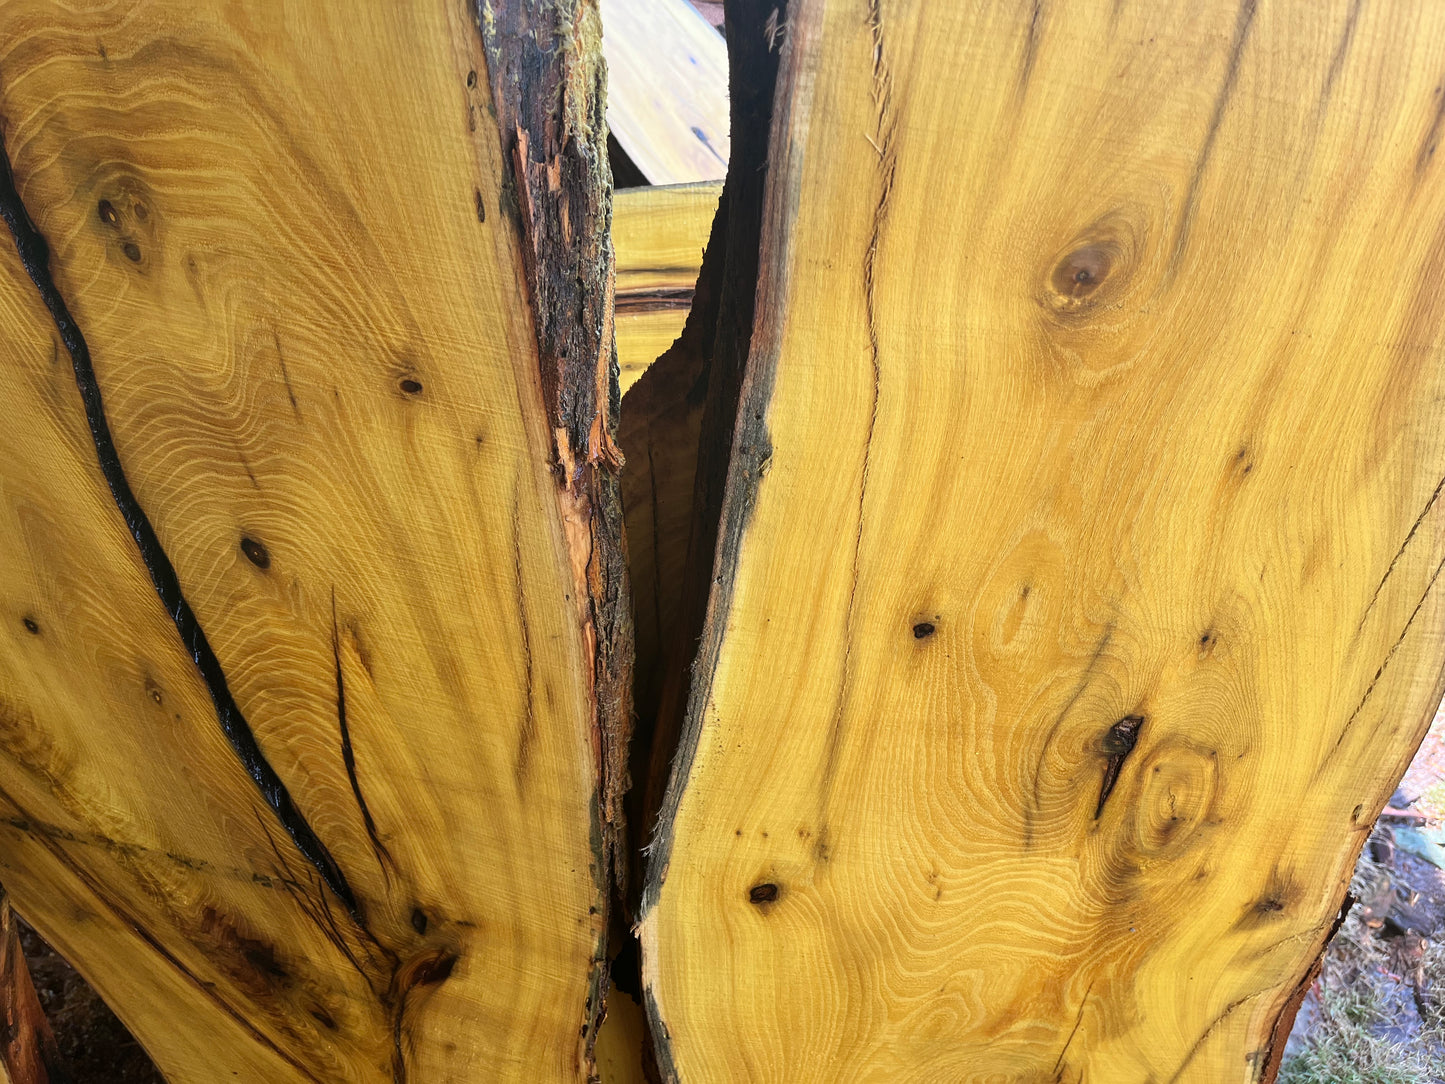 2" Thick Planed Osage Orange (Bois d'Arc) Live Edge Slabs for Charcuterie Boards, Furniture, Tables and Bar Tops, Shelves, and More - Kiln Dried